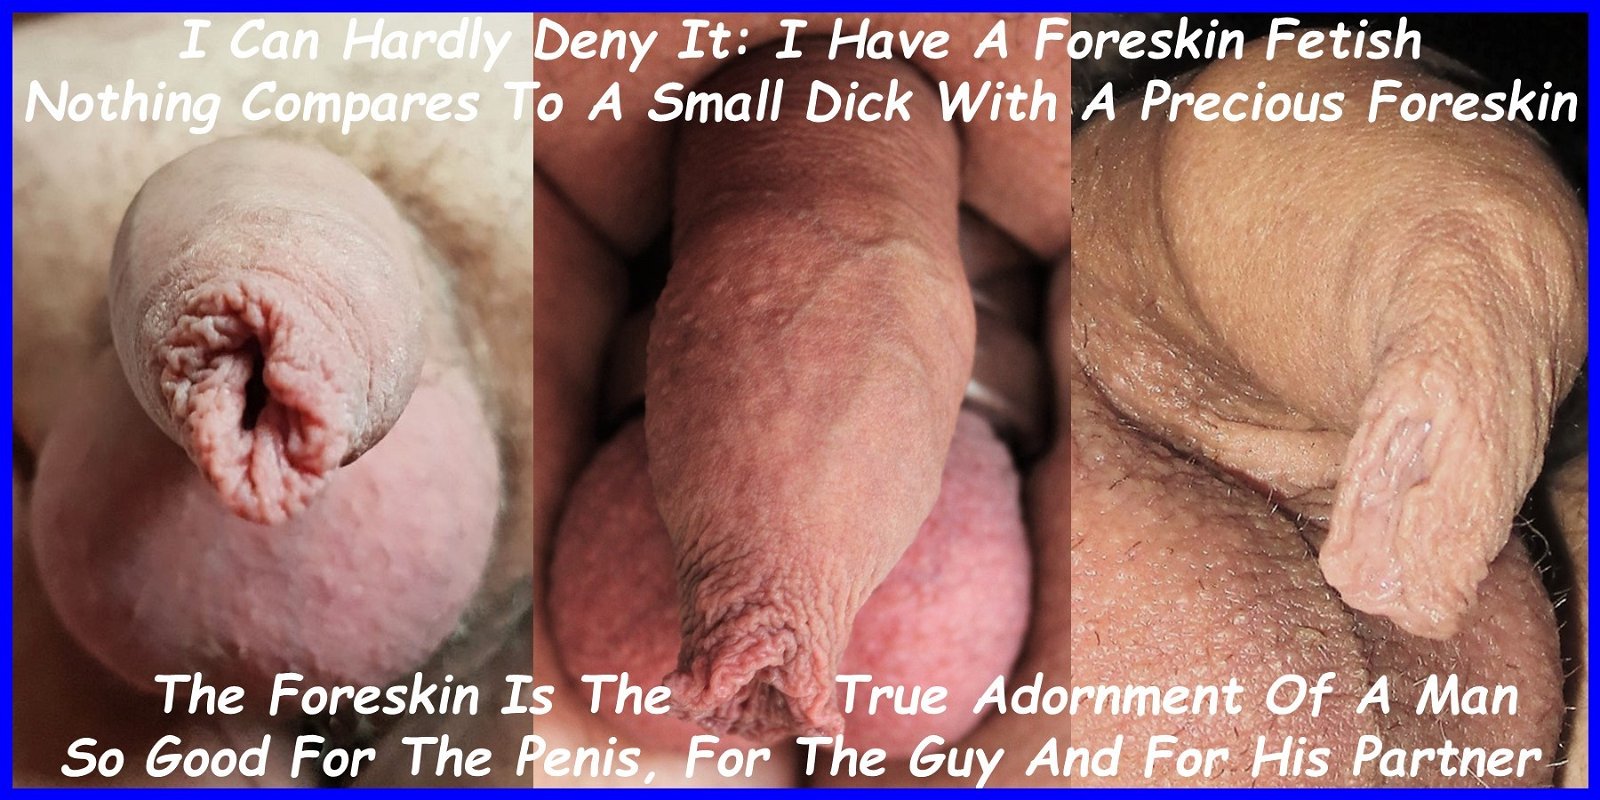 Photo by the foreskin is good with the username @theforeskinisgood, who is a verified user,  March 5, 2019 at 12:00 PM. The post is about the topic the foreskin is good for the penis and the text says 'I can hardly deny it. I have a foreskin fetish. Nothing compares to a small dick with a precious foreskin. The foreskin is the true adornment of a man. So good for the penis, for the guy and for his partner. #foreskin #prépuce #prepucio #vorhaut..'